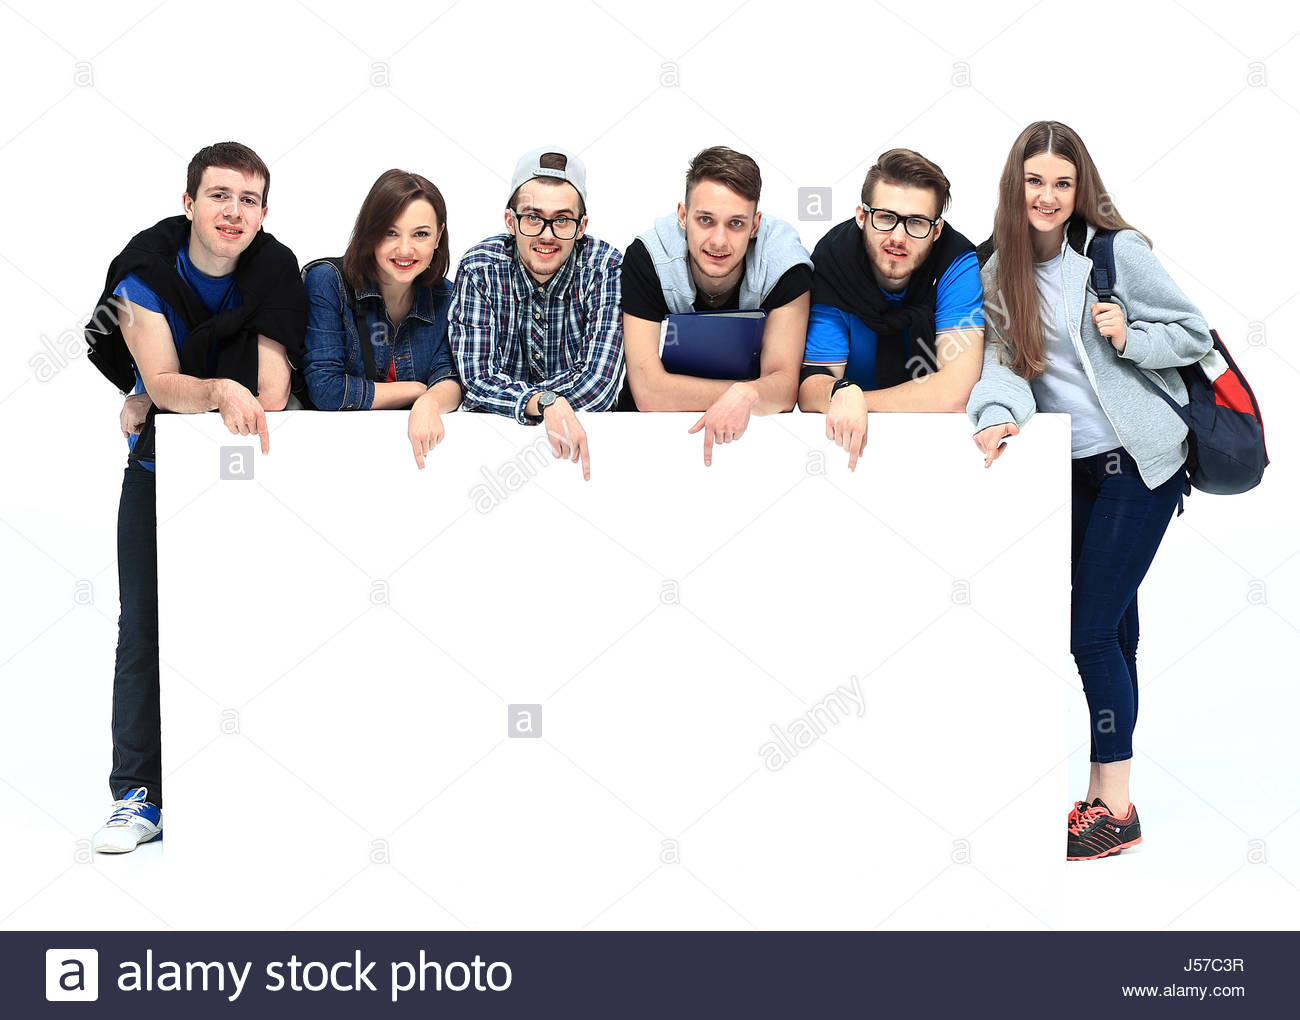 Full Length Portrait Of Confident College Students Displaying